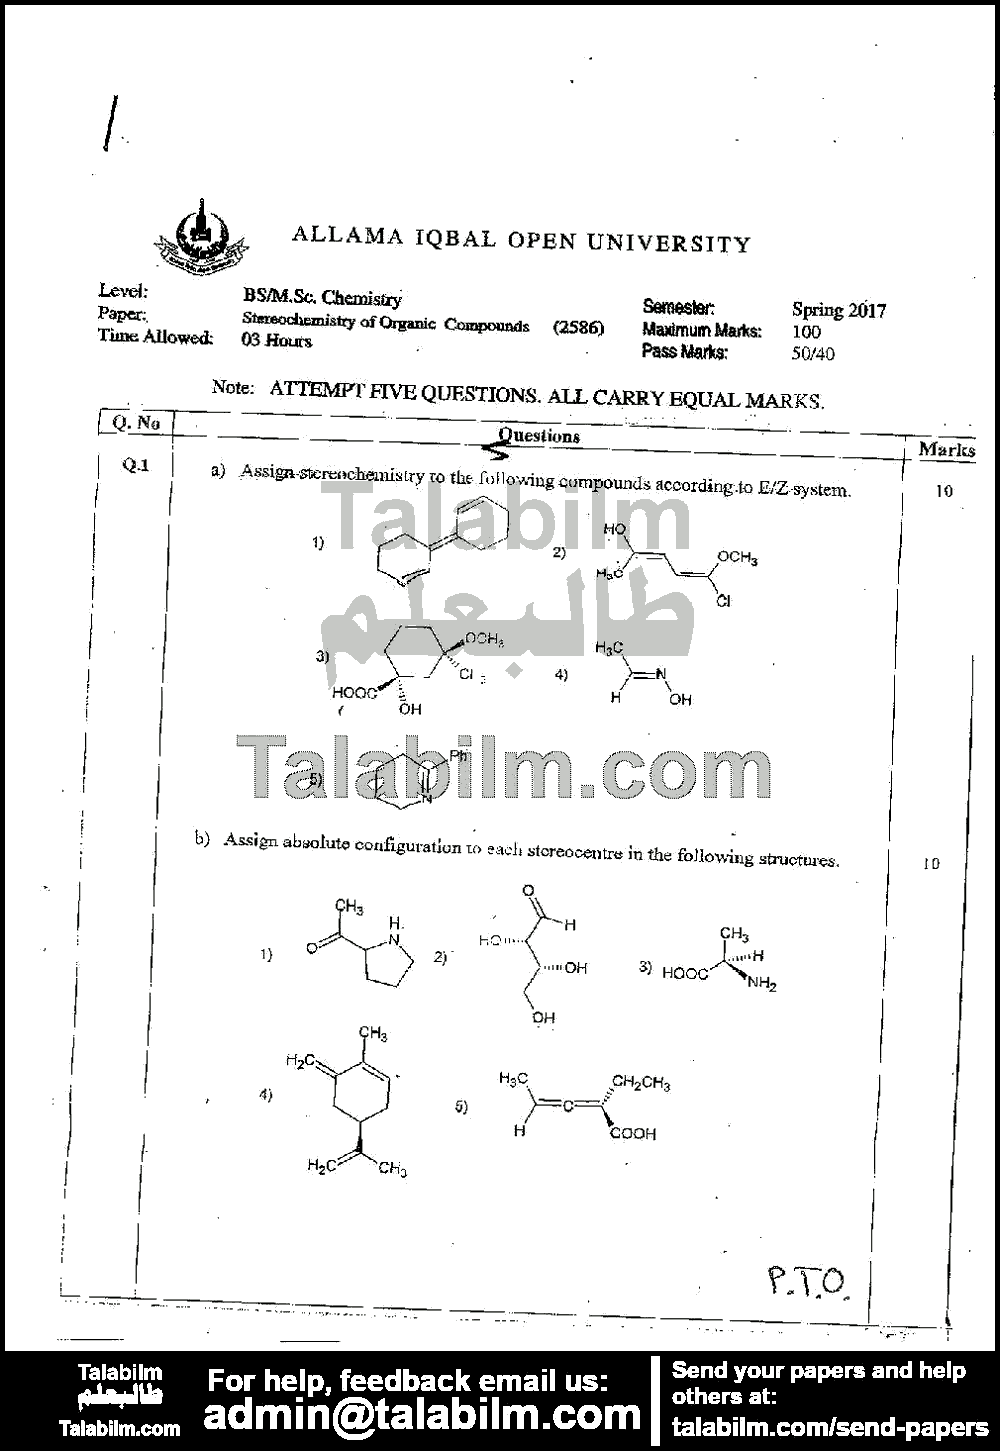 Stereochemistry of Organic Compounds 2586 past paper for Spring 2017